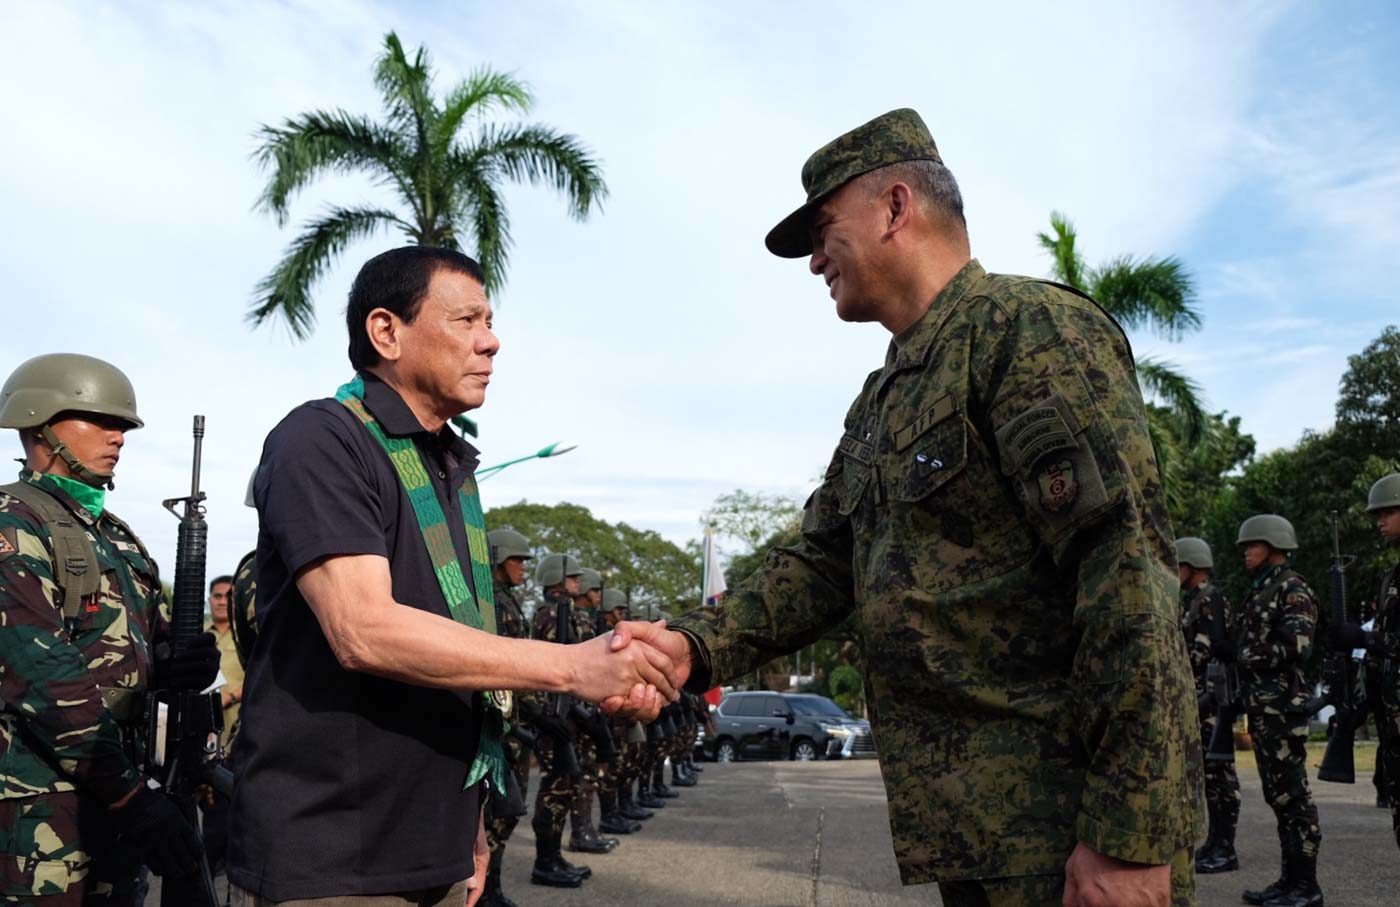 SECURING THE VOTE. Then 6th Infantry Division Commander Brigadier General Arnel dela Vega greets President Rodrigo Duterte upon his arrival at Camp Siongco, Awang, Maguindanao on January 27, 2017. Malacañang photo 